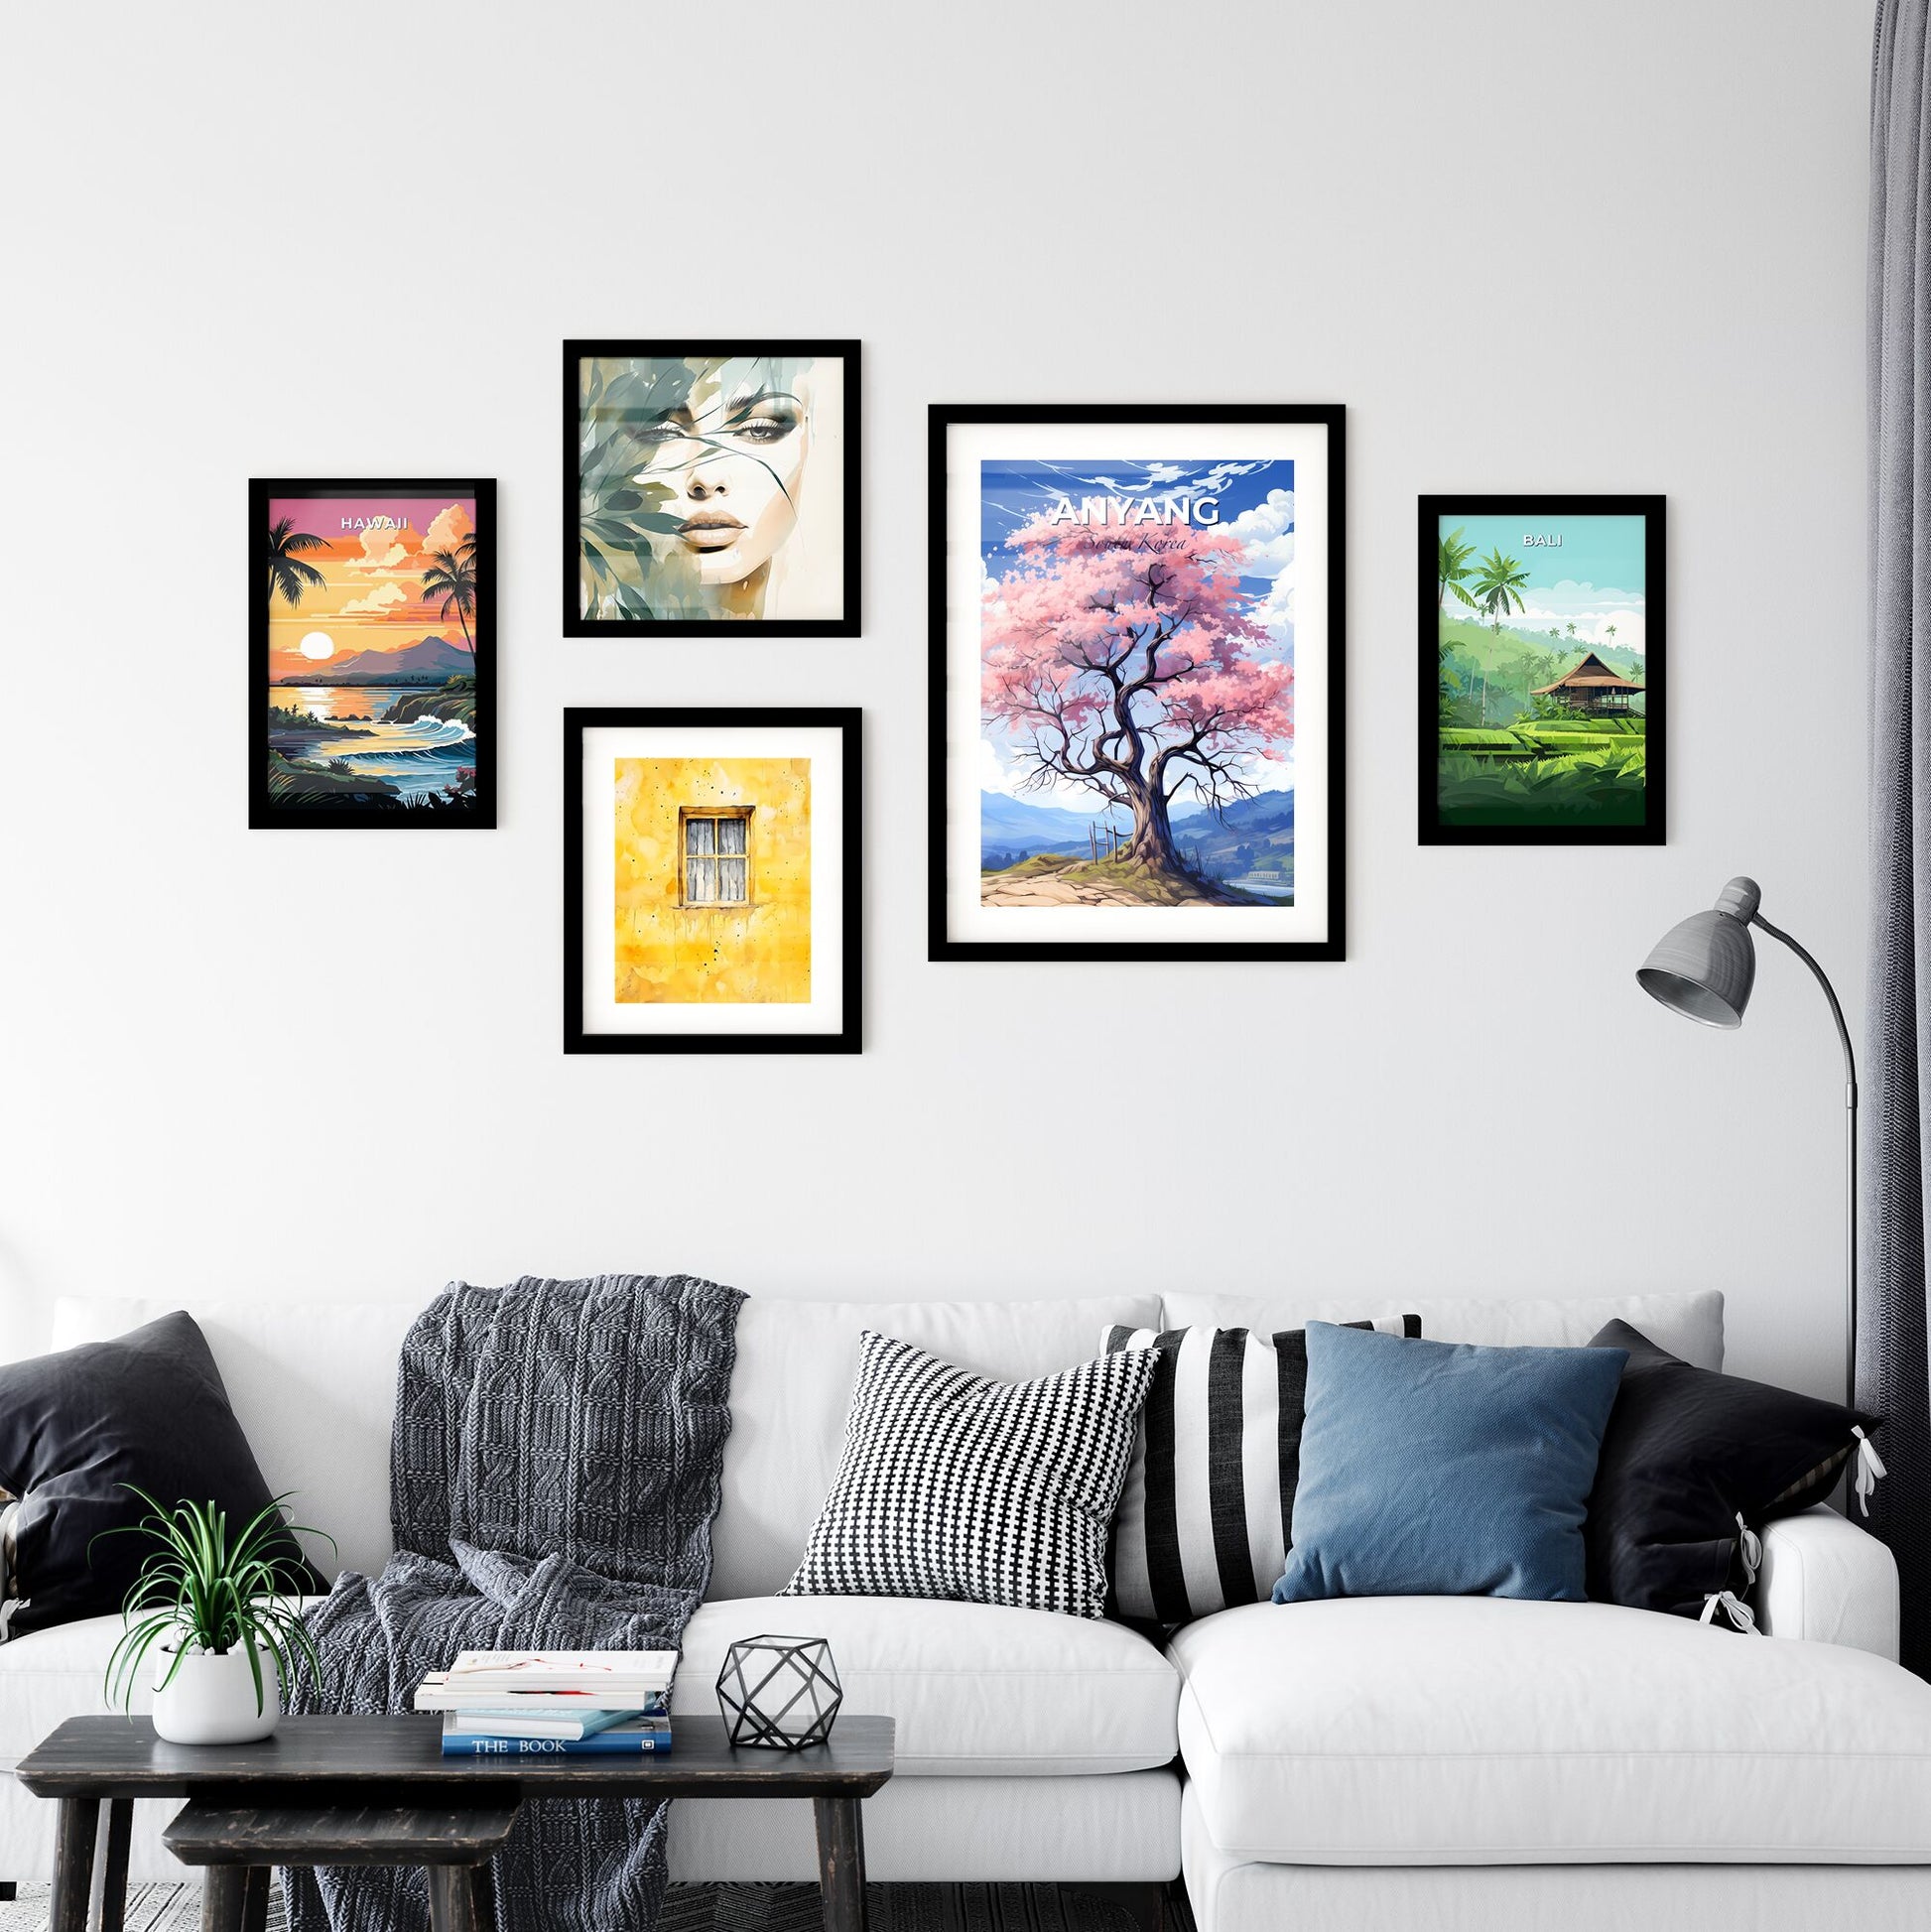 Vibrant Art Painting of Anyang South Korea Skyline Featuring Pink Flowering Tree Default Title